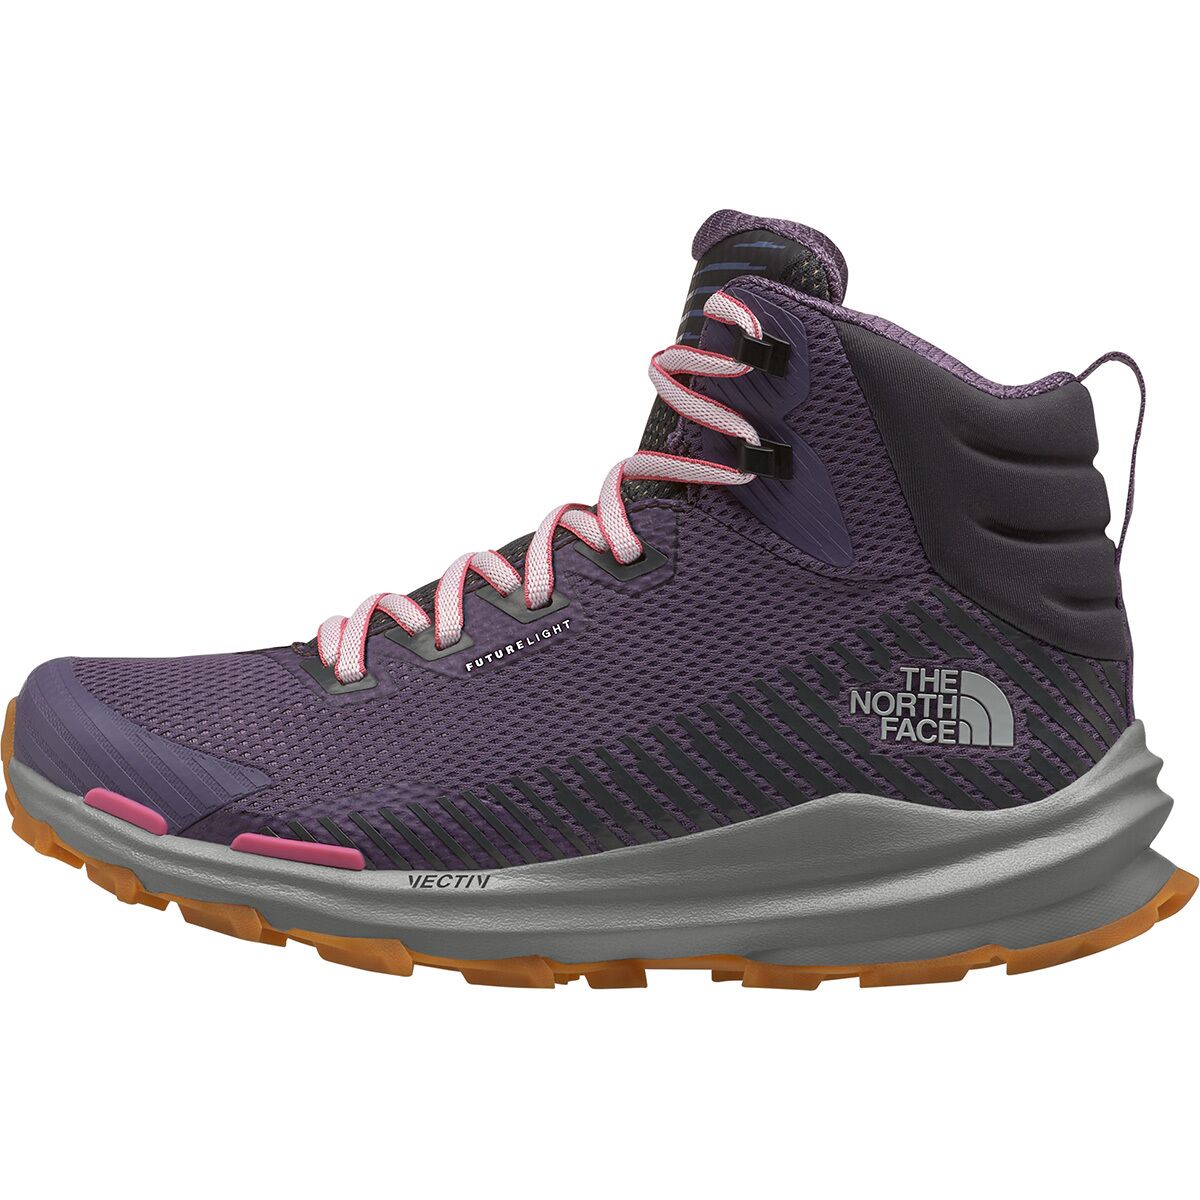 The North Face VECTIV Fastpack Mid FUTURELIGHT Hiking Boot - Women's